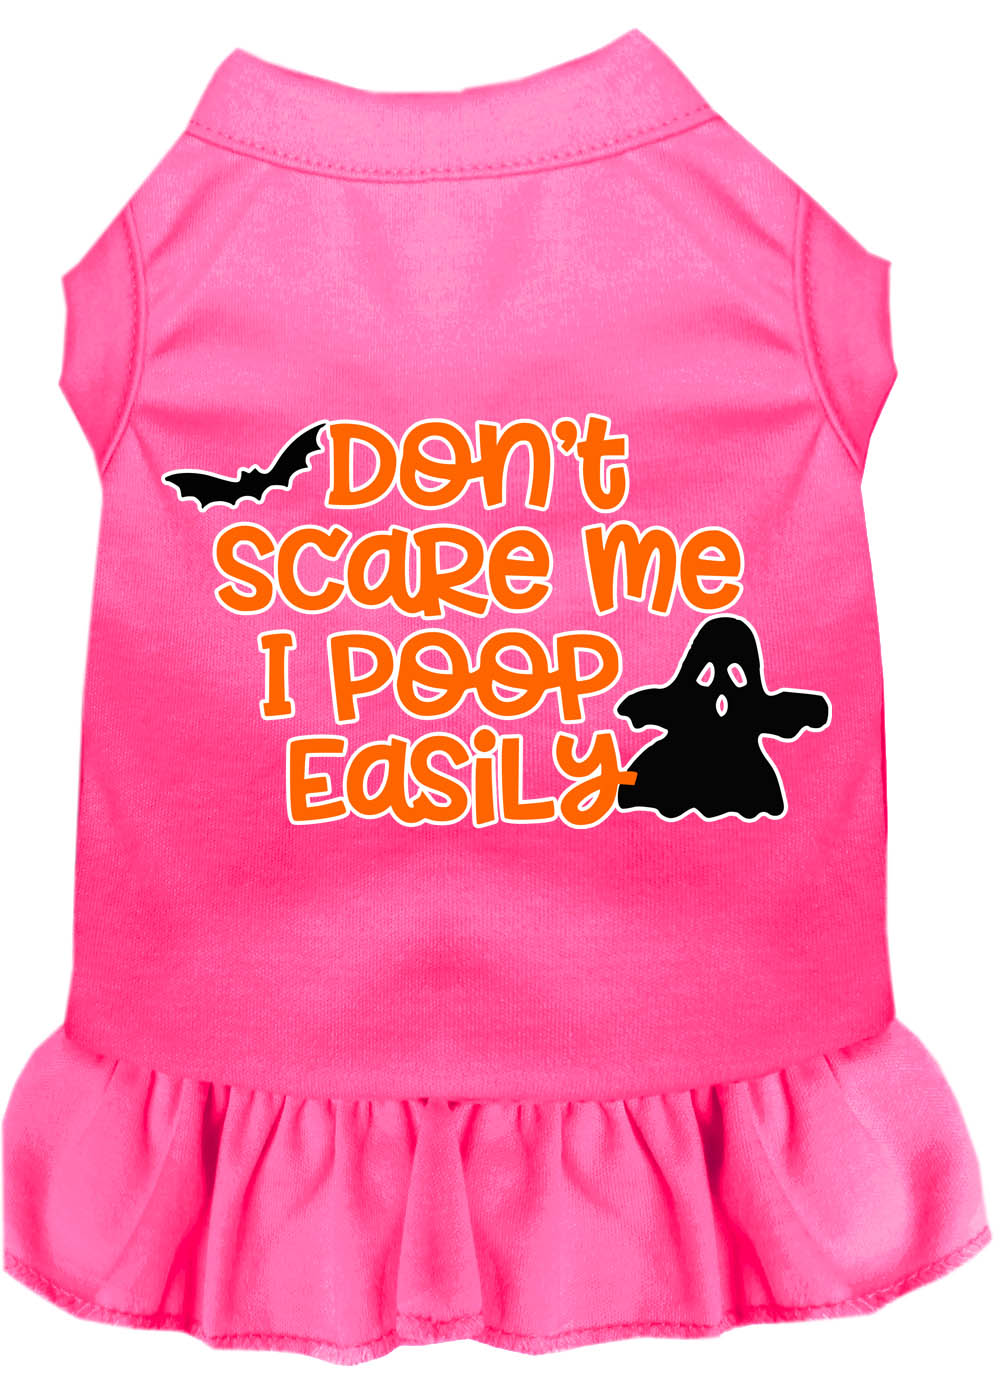 Don't Scare Me, Poops Easily Screen Print Dog Dress Bright Pink Med